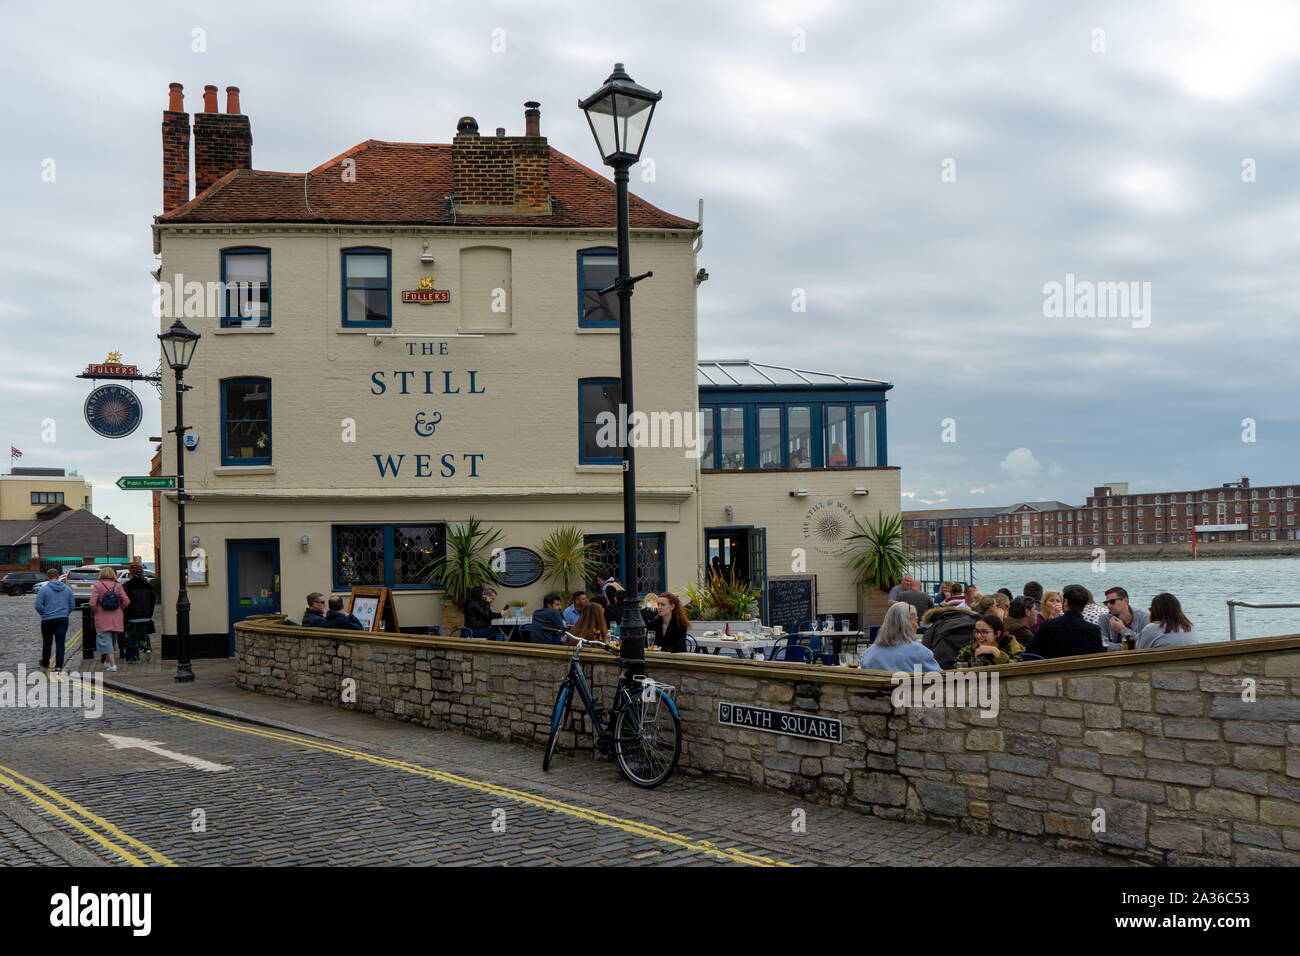 The Still and west pub in old Portsmouth, Hampshire with pub goers drinking in the beer garden Stock Photo